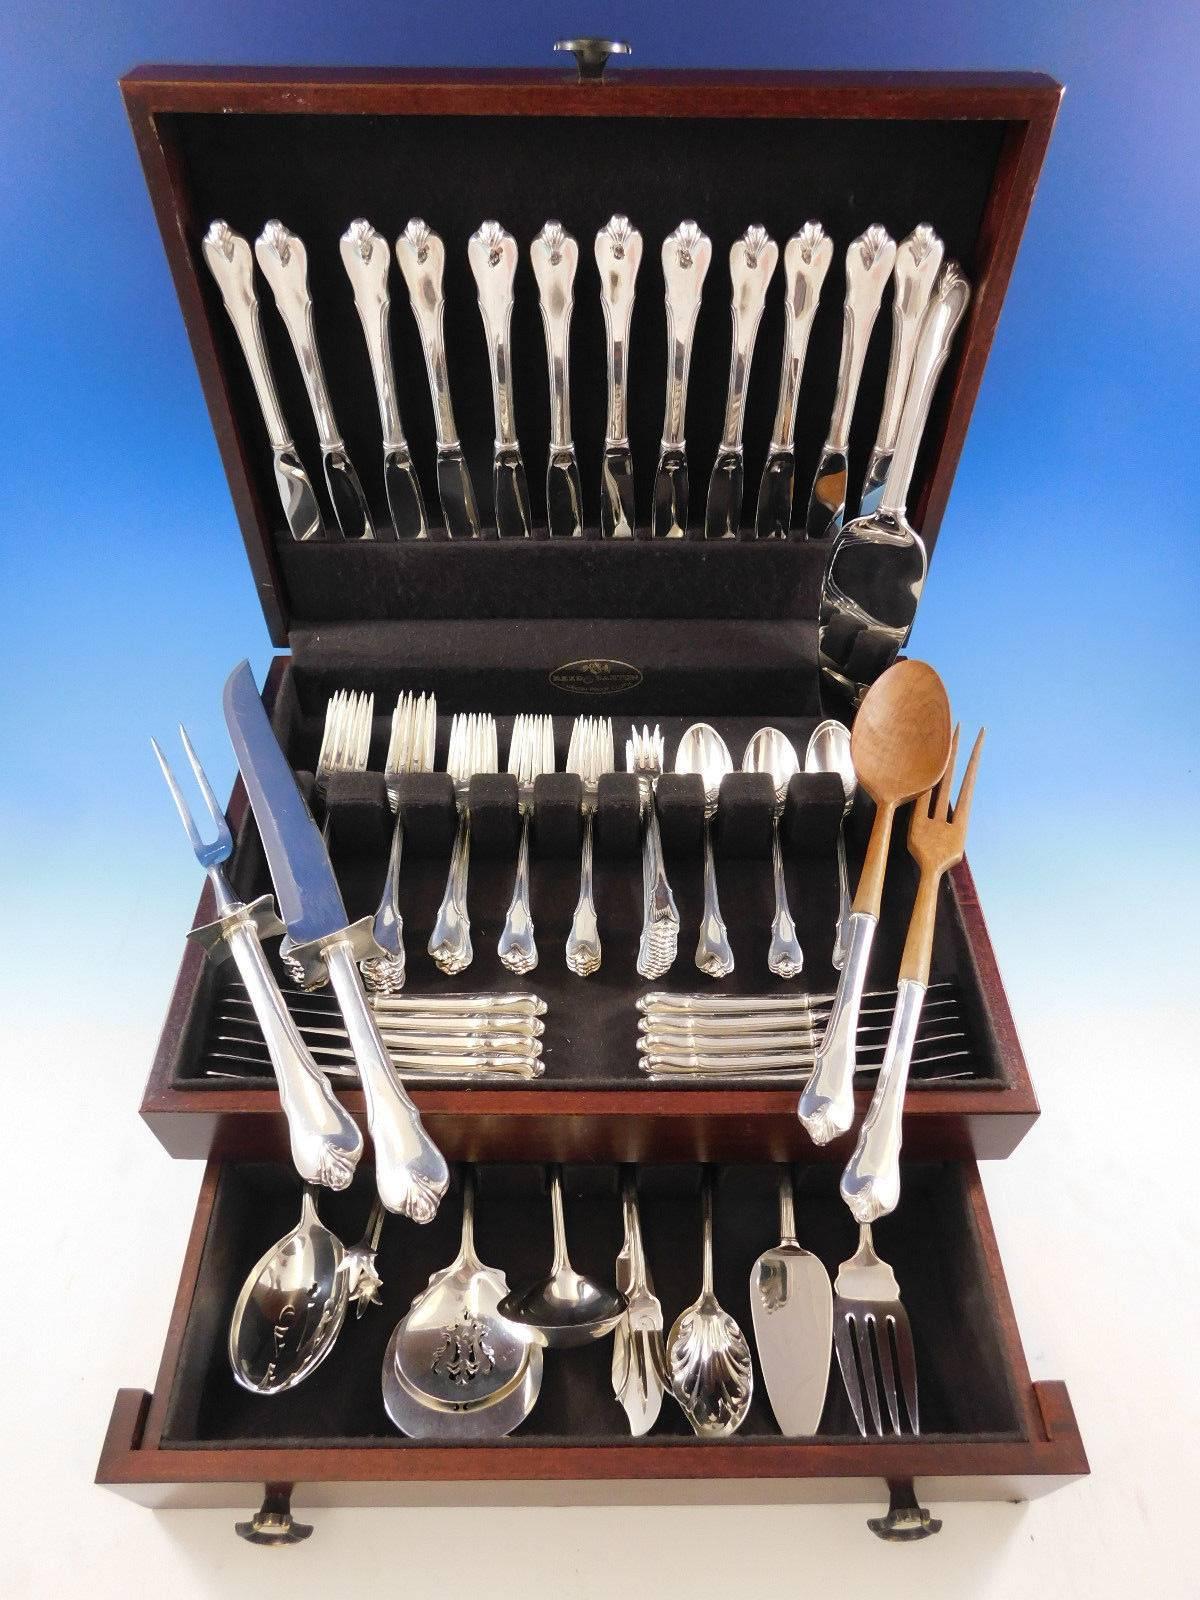 Grand Colonial by Wallace sterling silver flatware set, 91 pieces. This set includes: 12 knives, 8 7/8